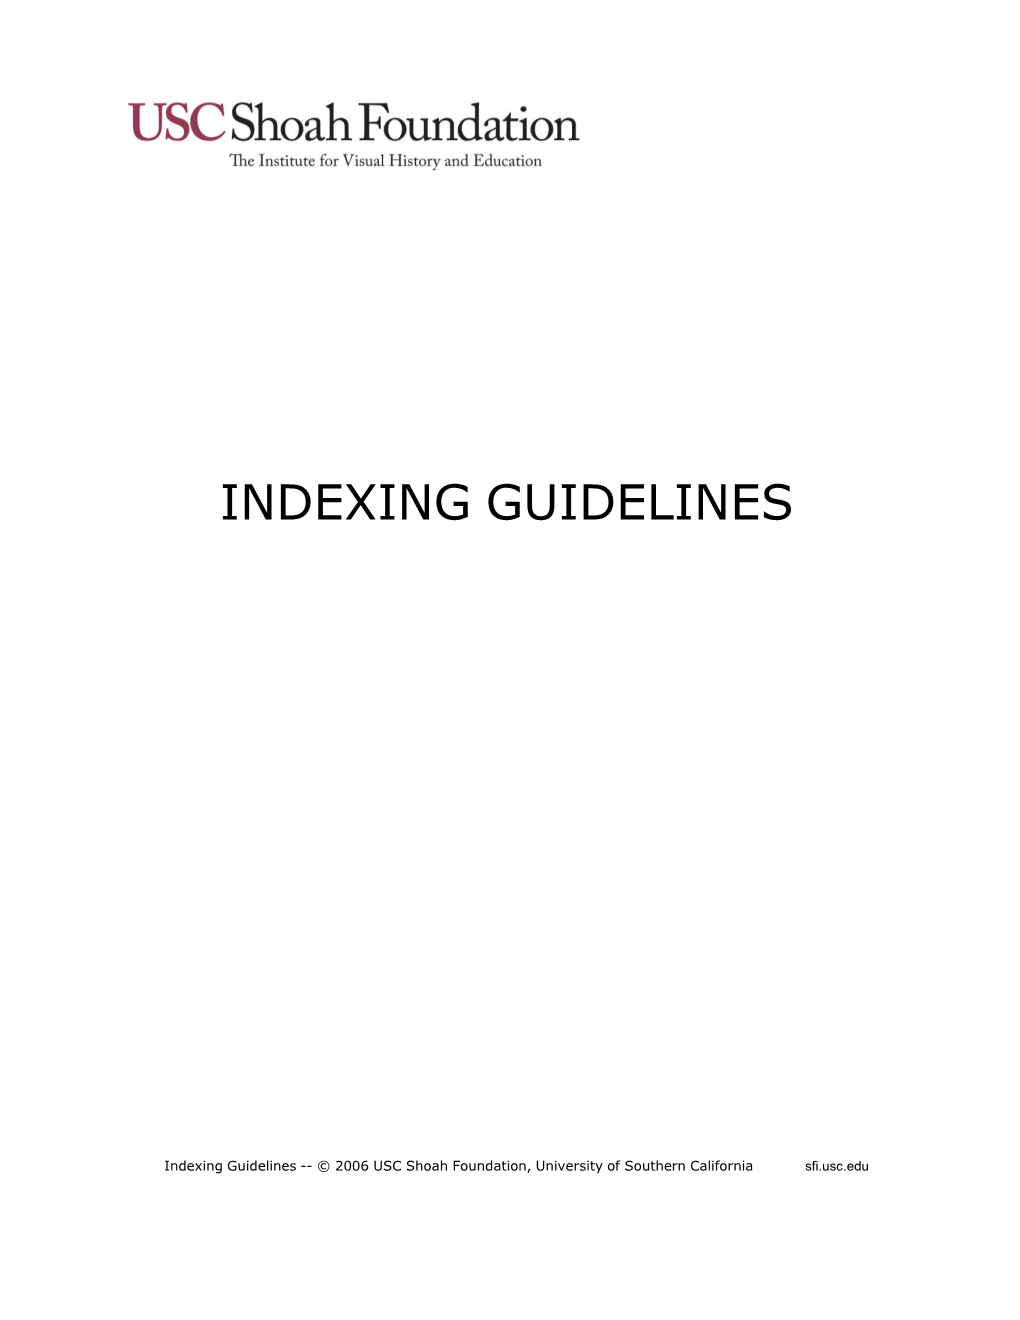 Indexing Guidelines